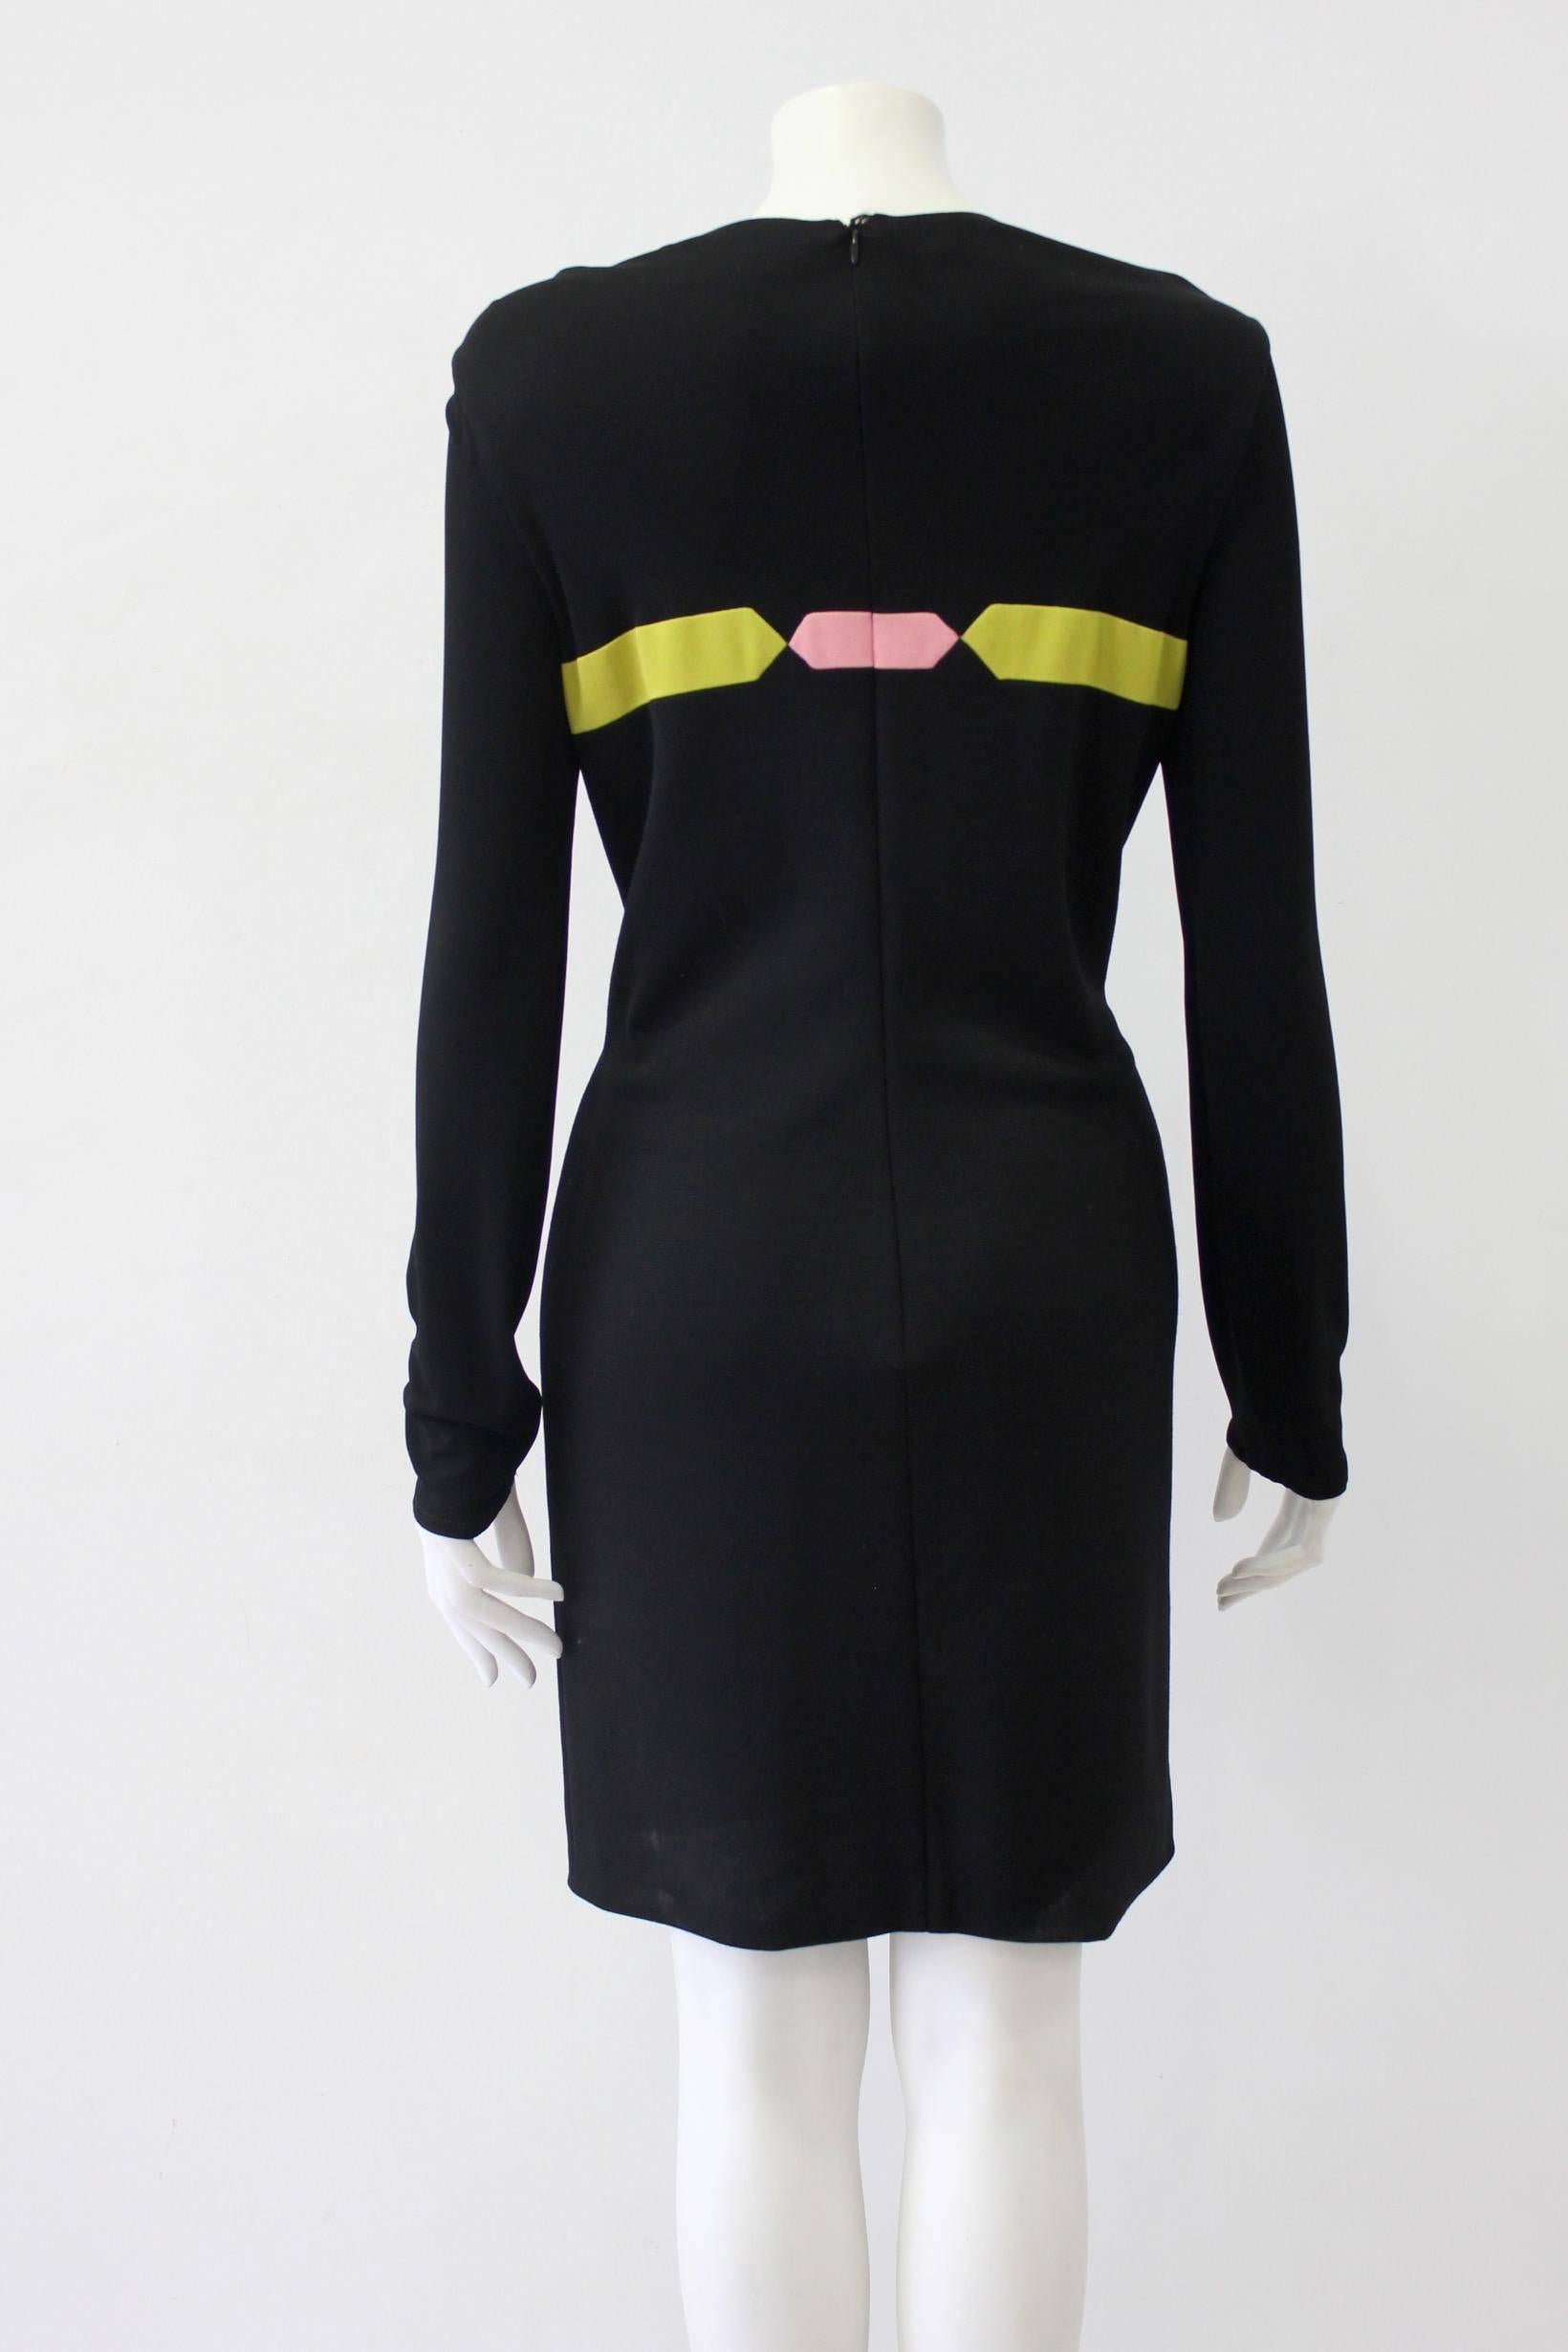 Women's Gianni Versaxe Couture Colore-Blocked Shift Dress Fall 1997 For Sale